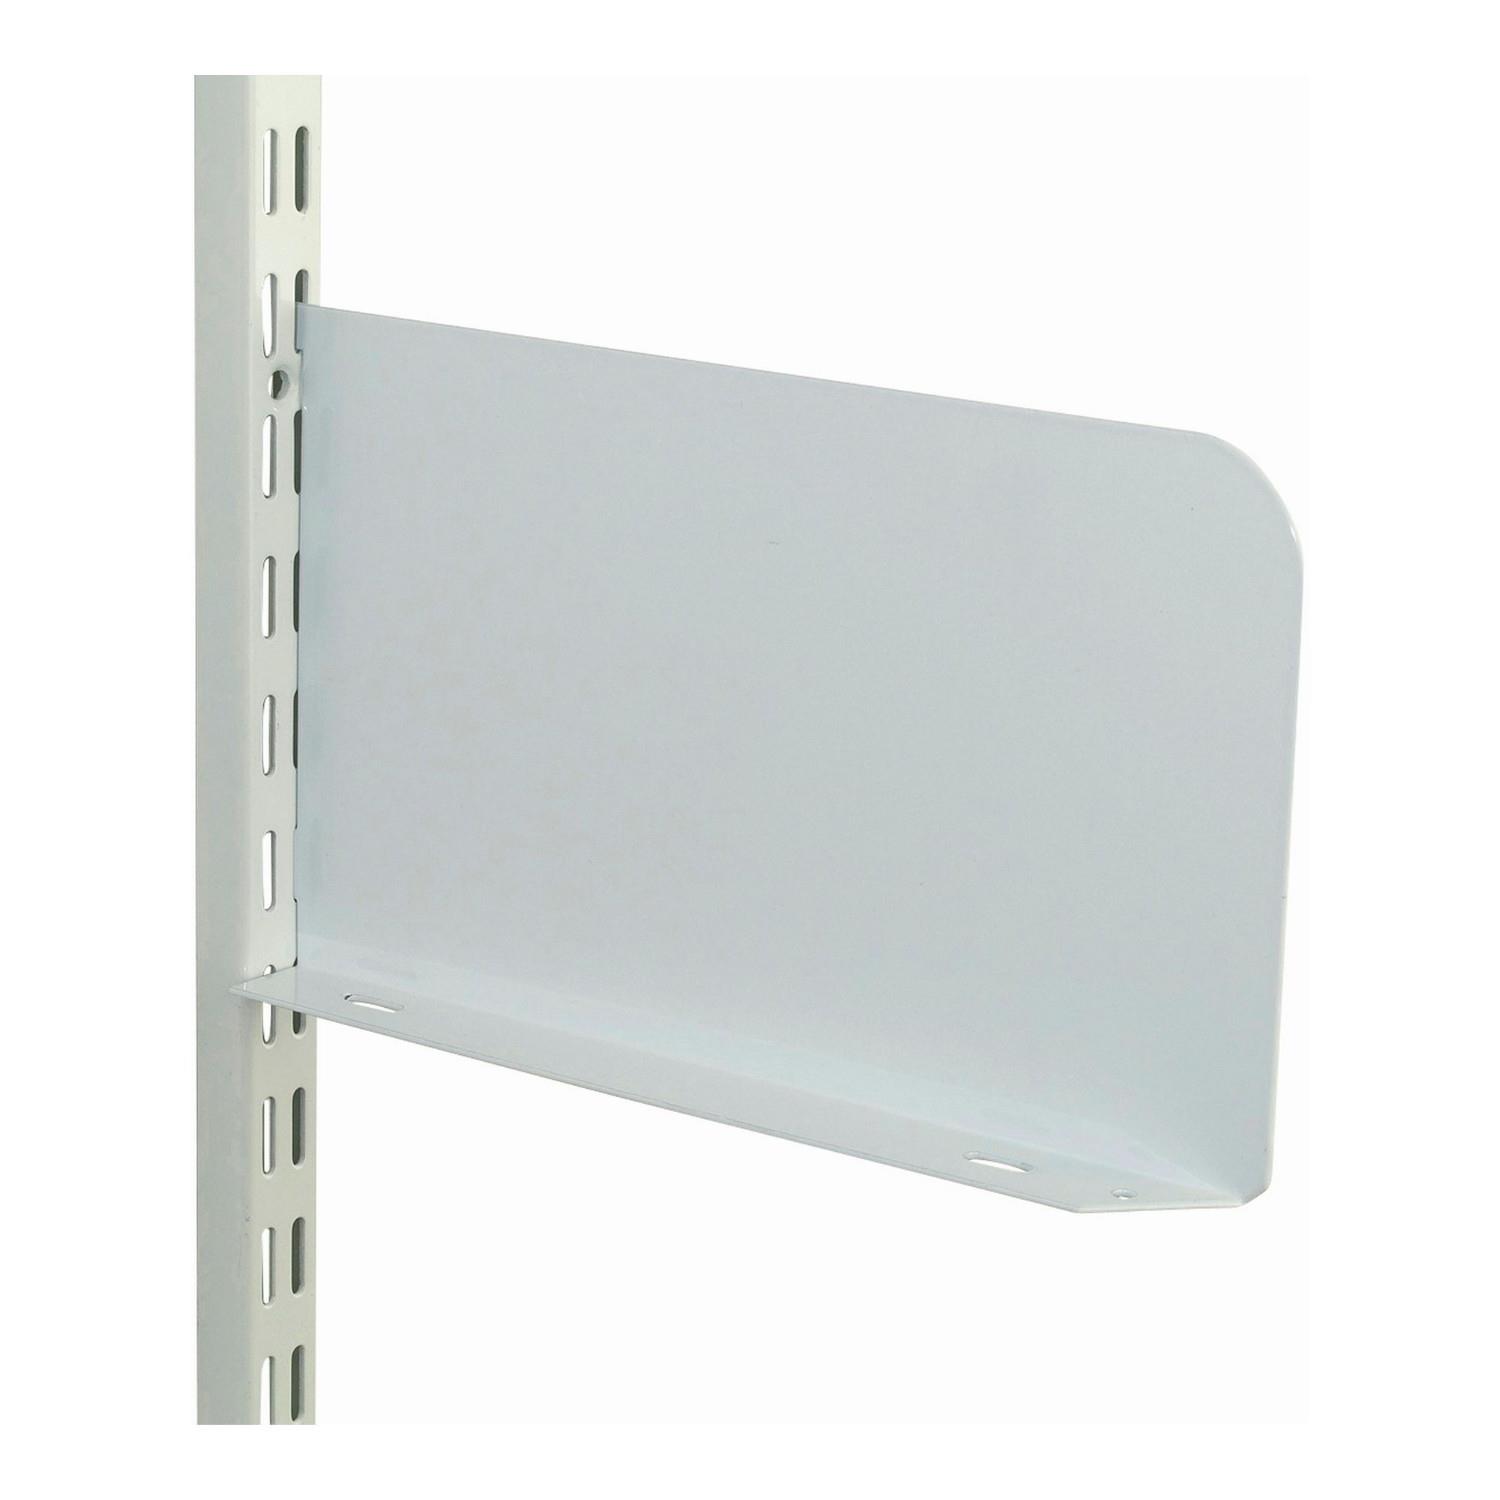 Sapphire DSE150 Shelf End; Twin Slot System; 150mm (6"); White (WH); Pack (2) (1 Pair)